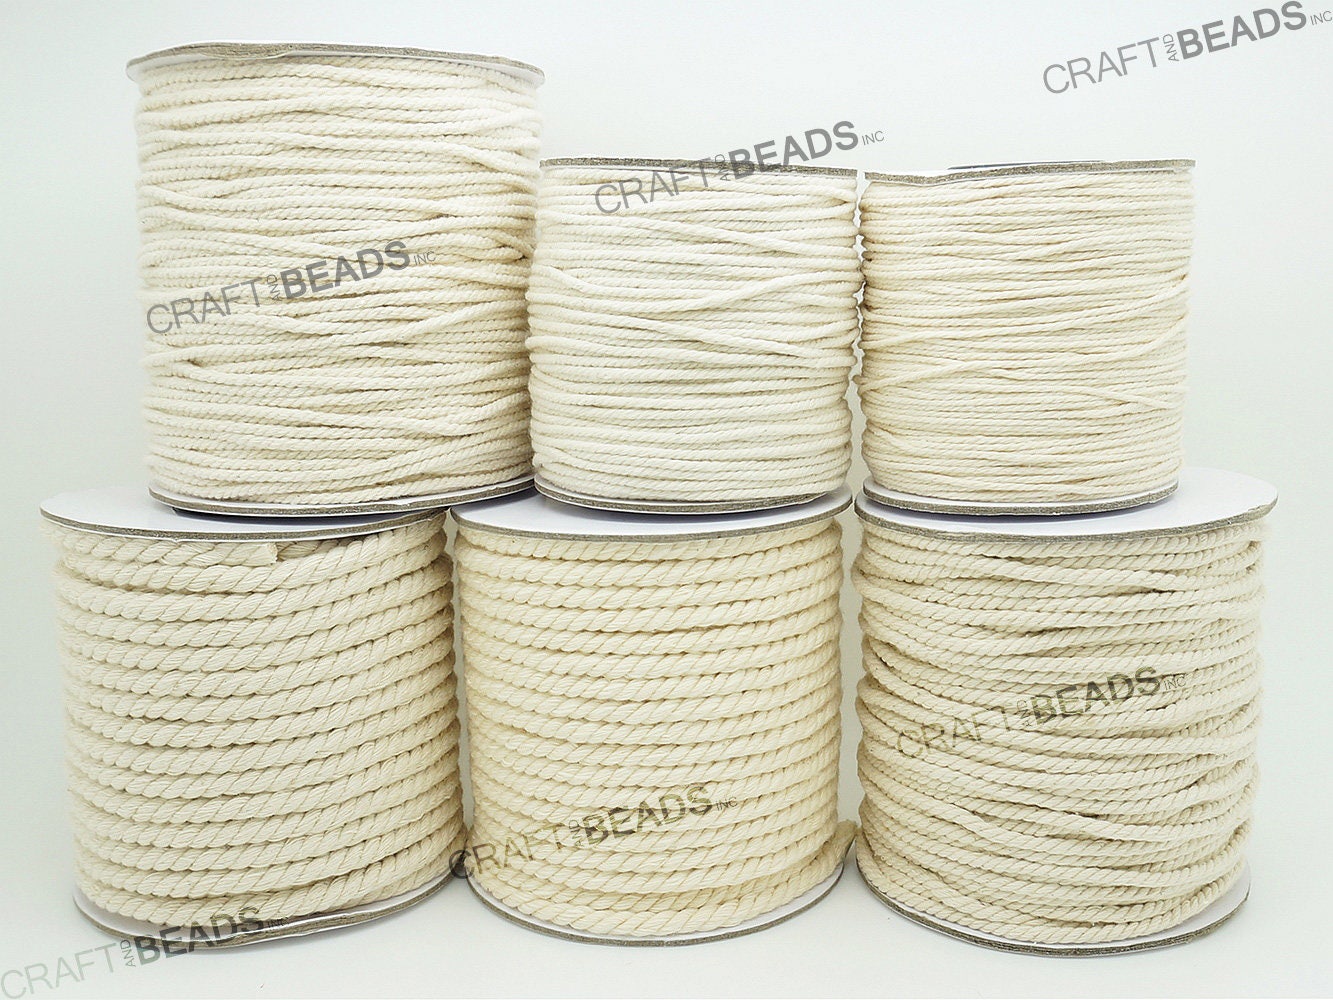 1mm-5mm Cotton Twisted Cord Rope Craft Macrame Artisan String Popular Set New